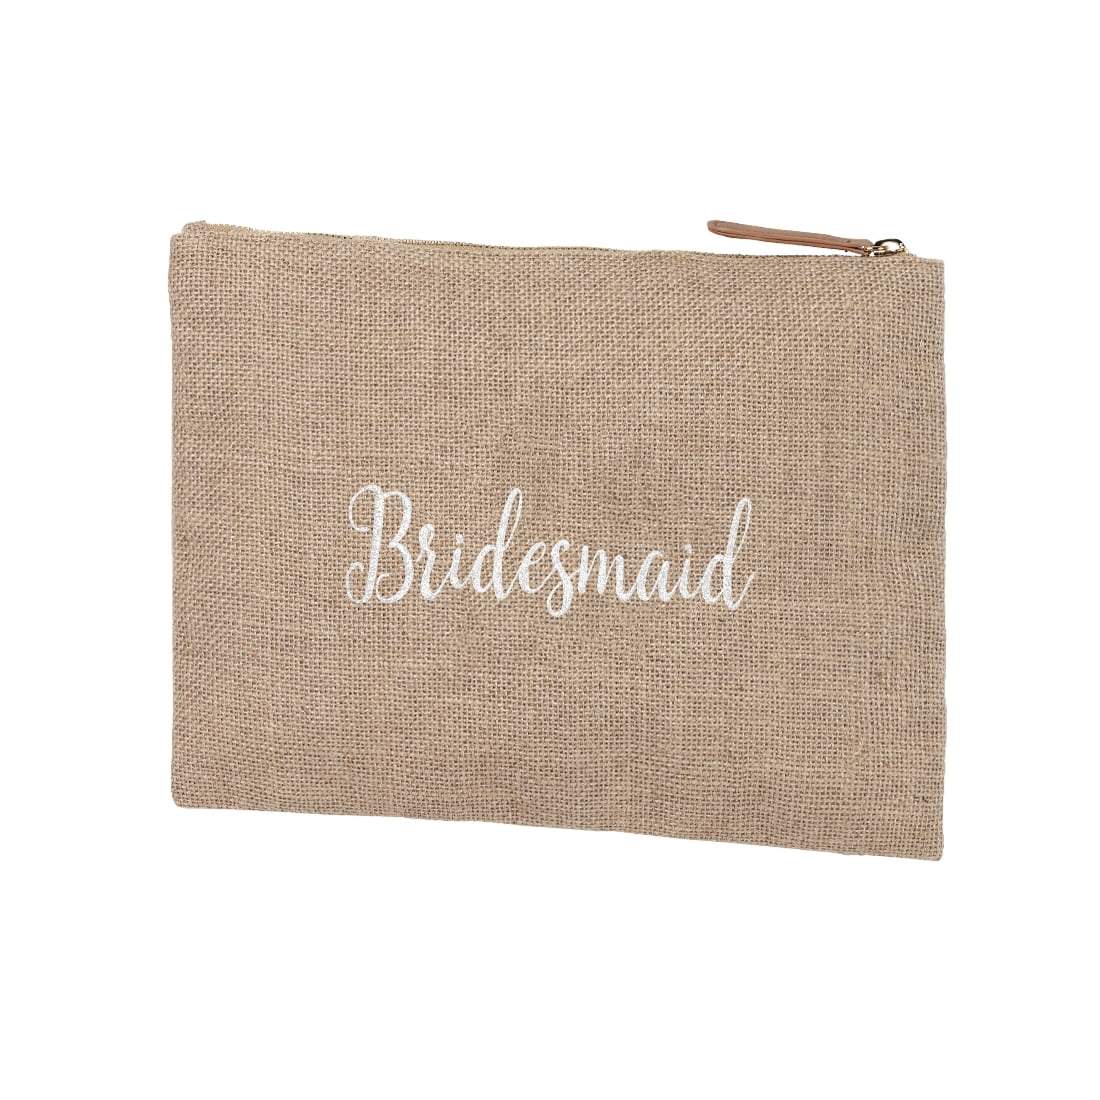 Burlap Zip Pouch Embroidered BRIDESMAID in White Thread